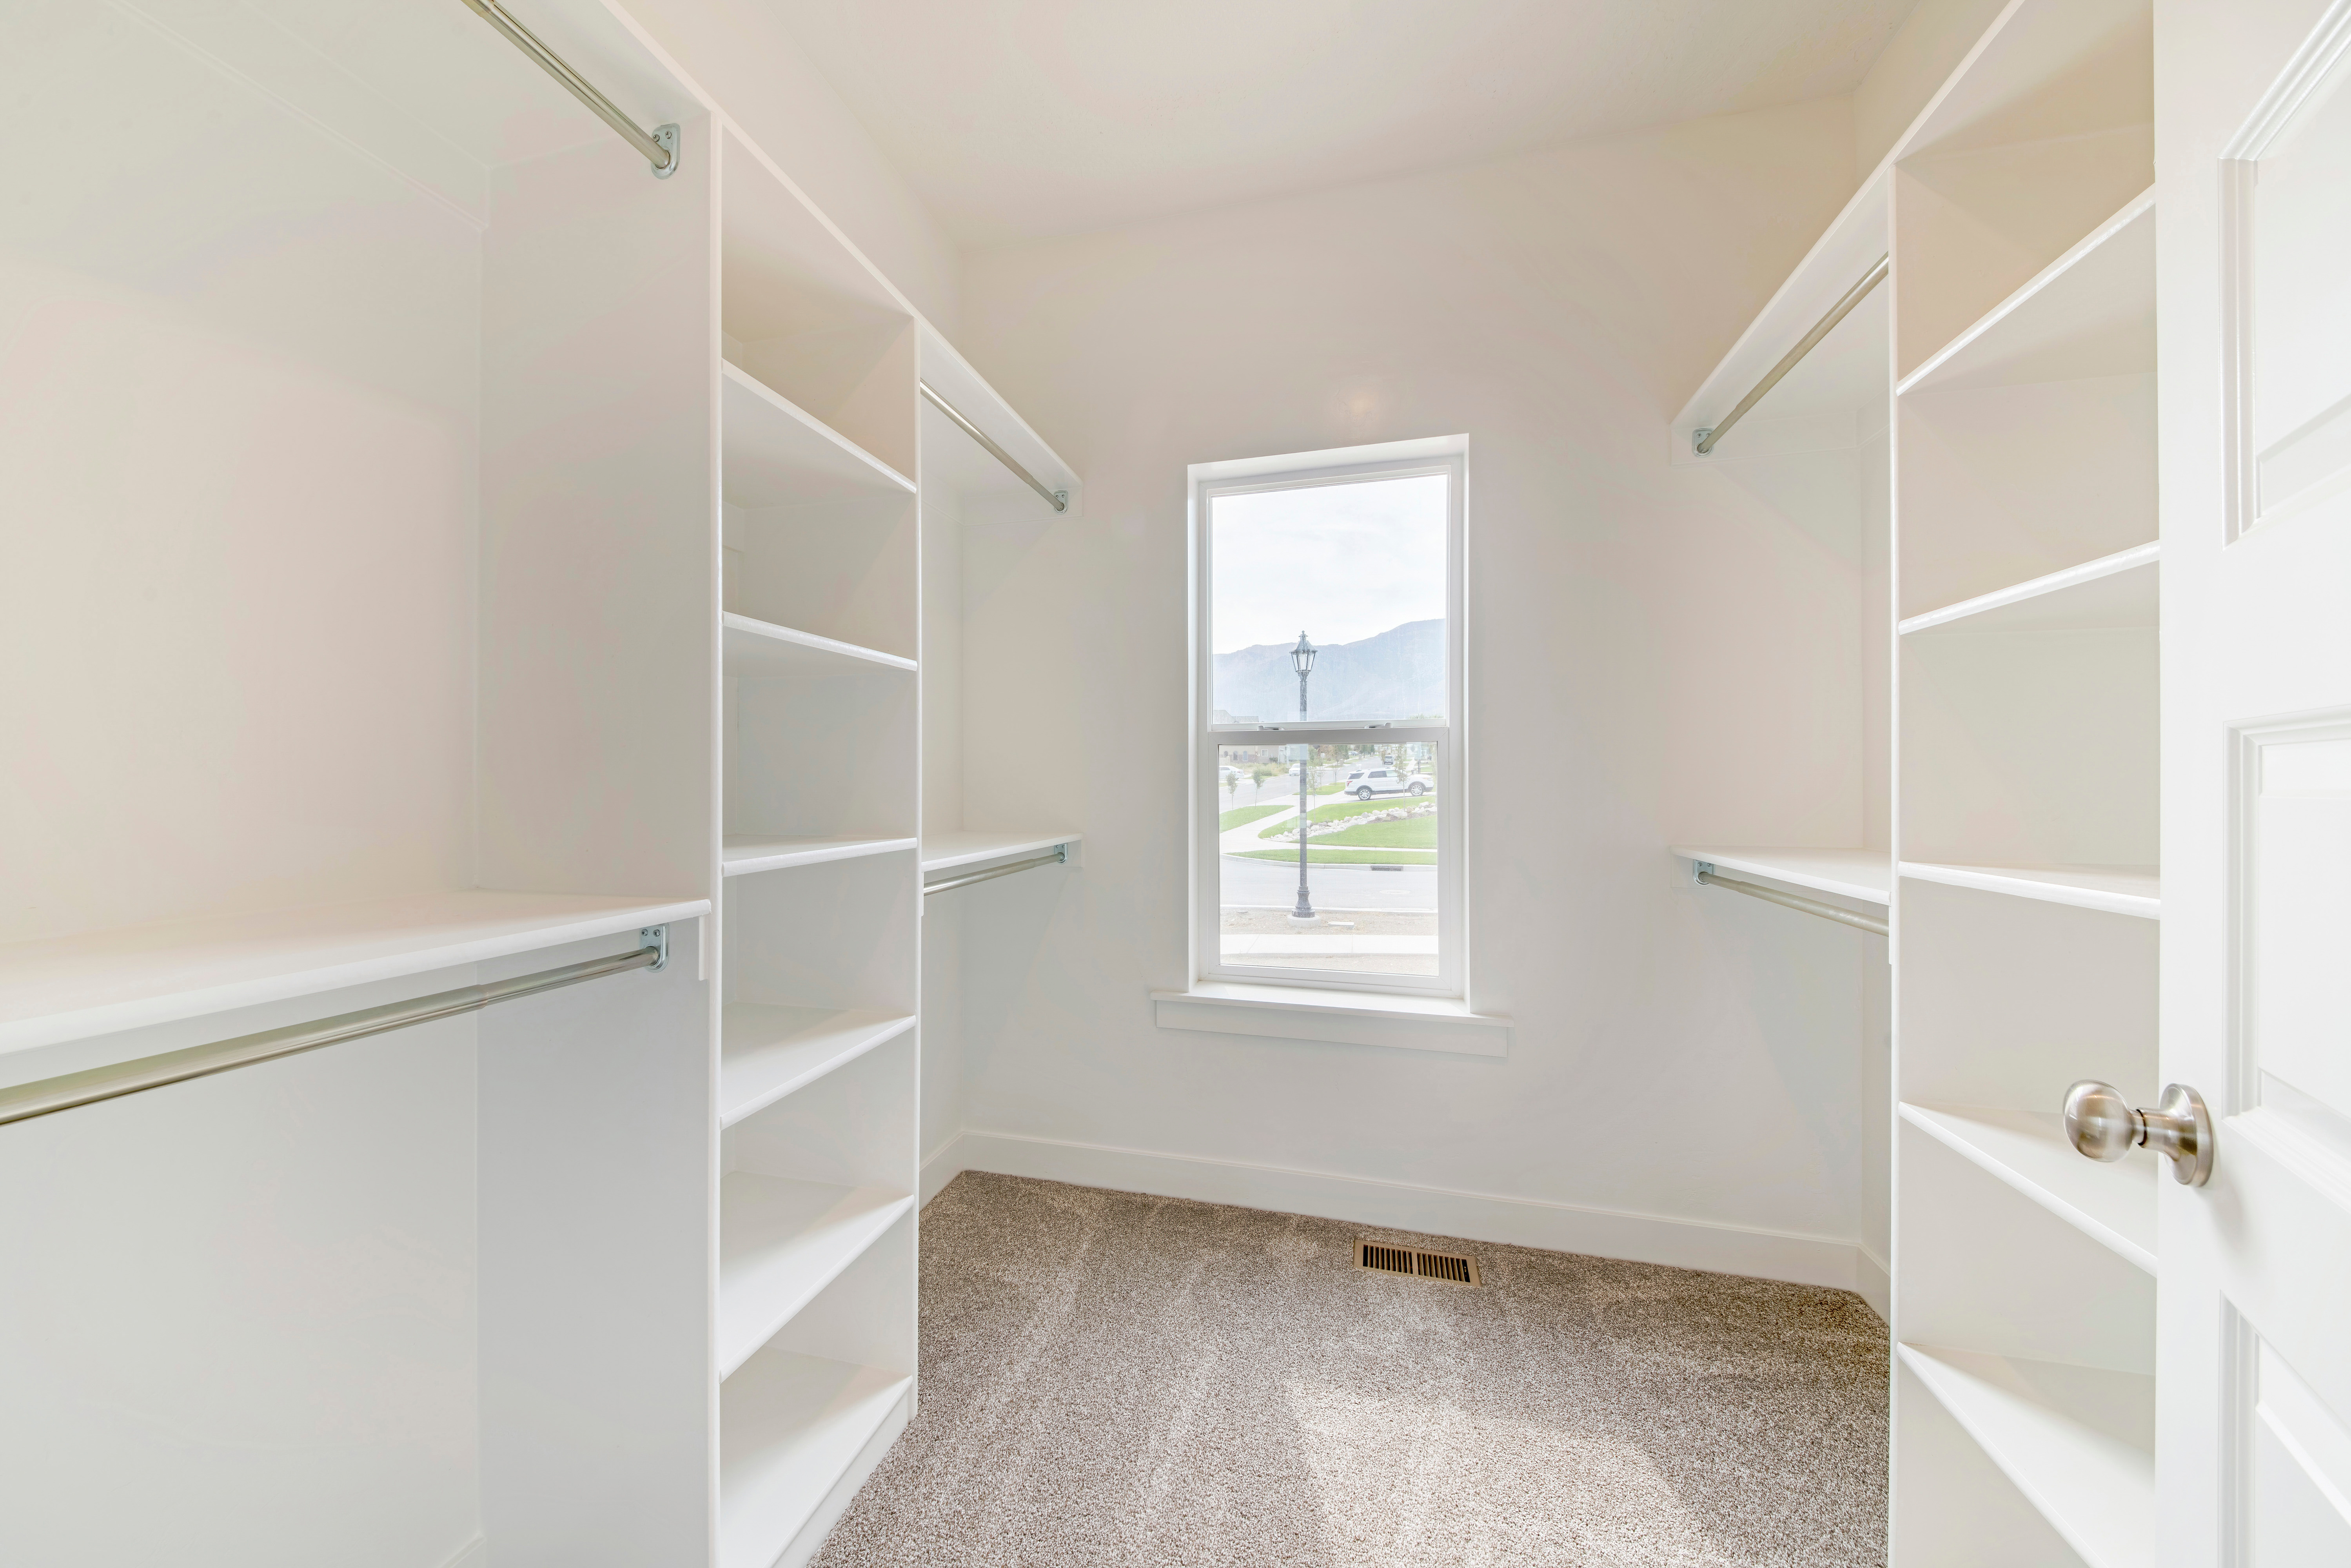 A single hung window illuminates a neatly organized closet, blending simplicity and efficiency.
Title: Single Hung Windows: Enhancing Light and Space in Modern Homes